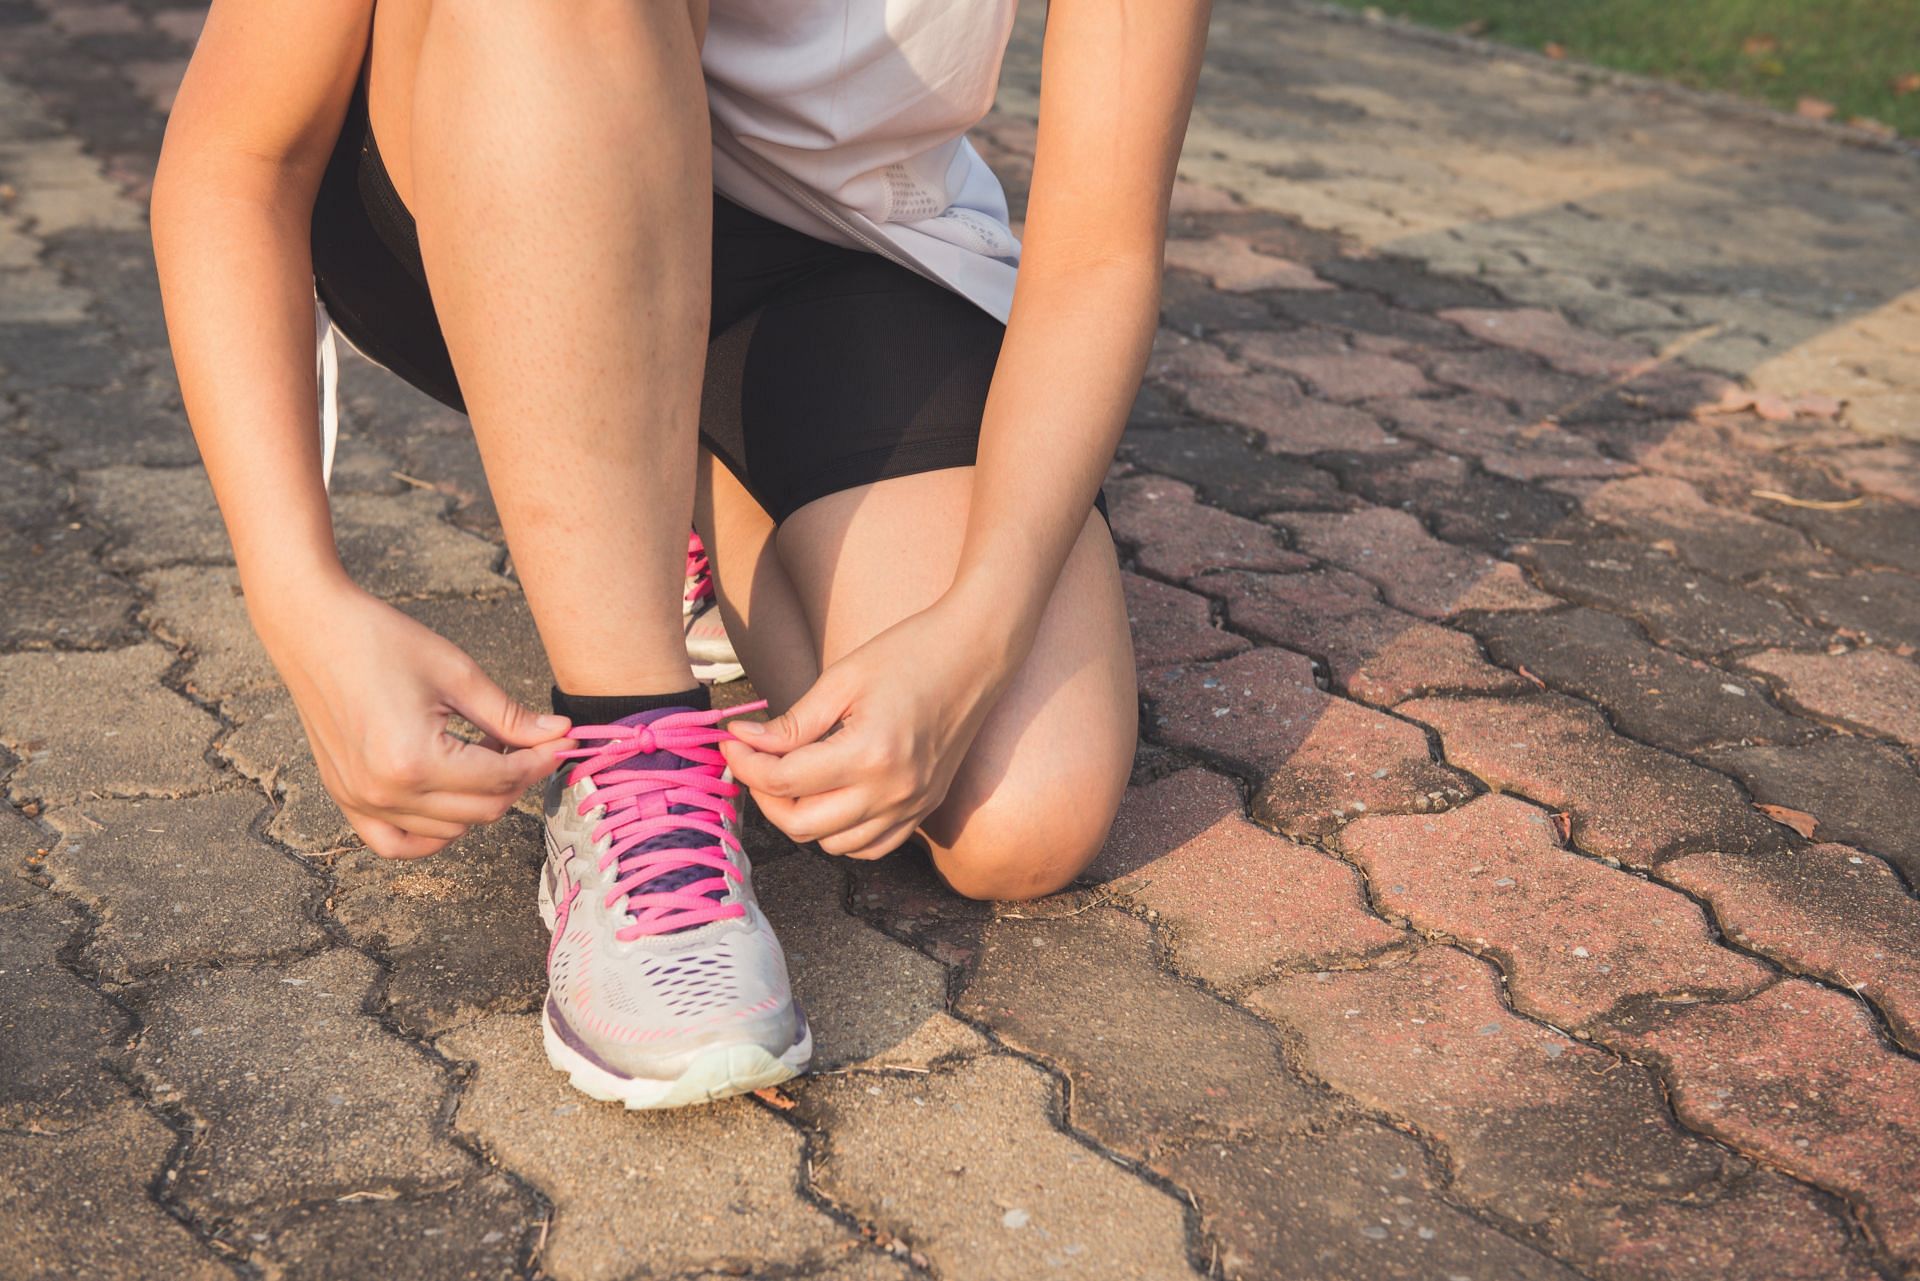 Tips to use carbon-plated running shoes (image sourced via Pexels / Photo by Tirachard)